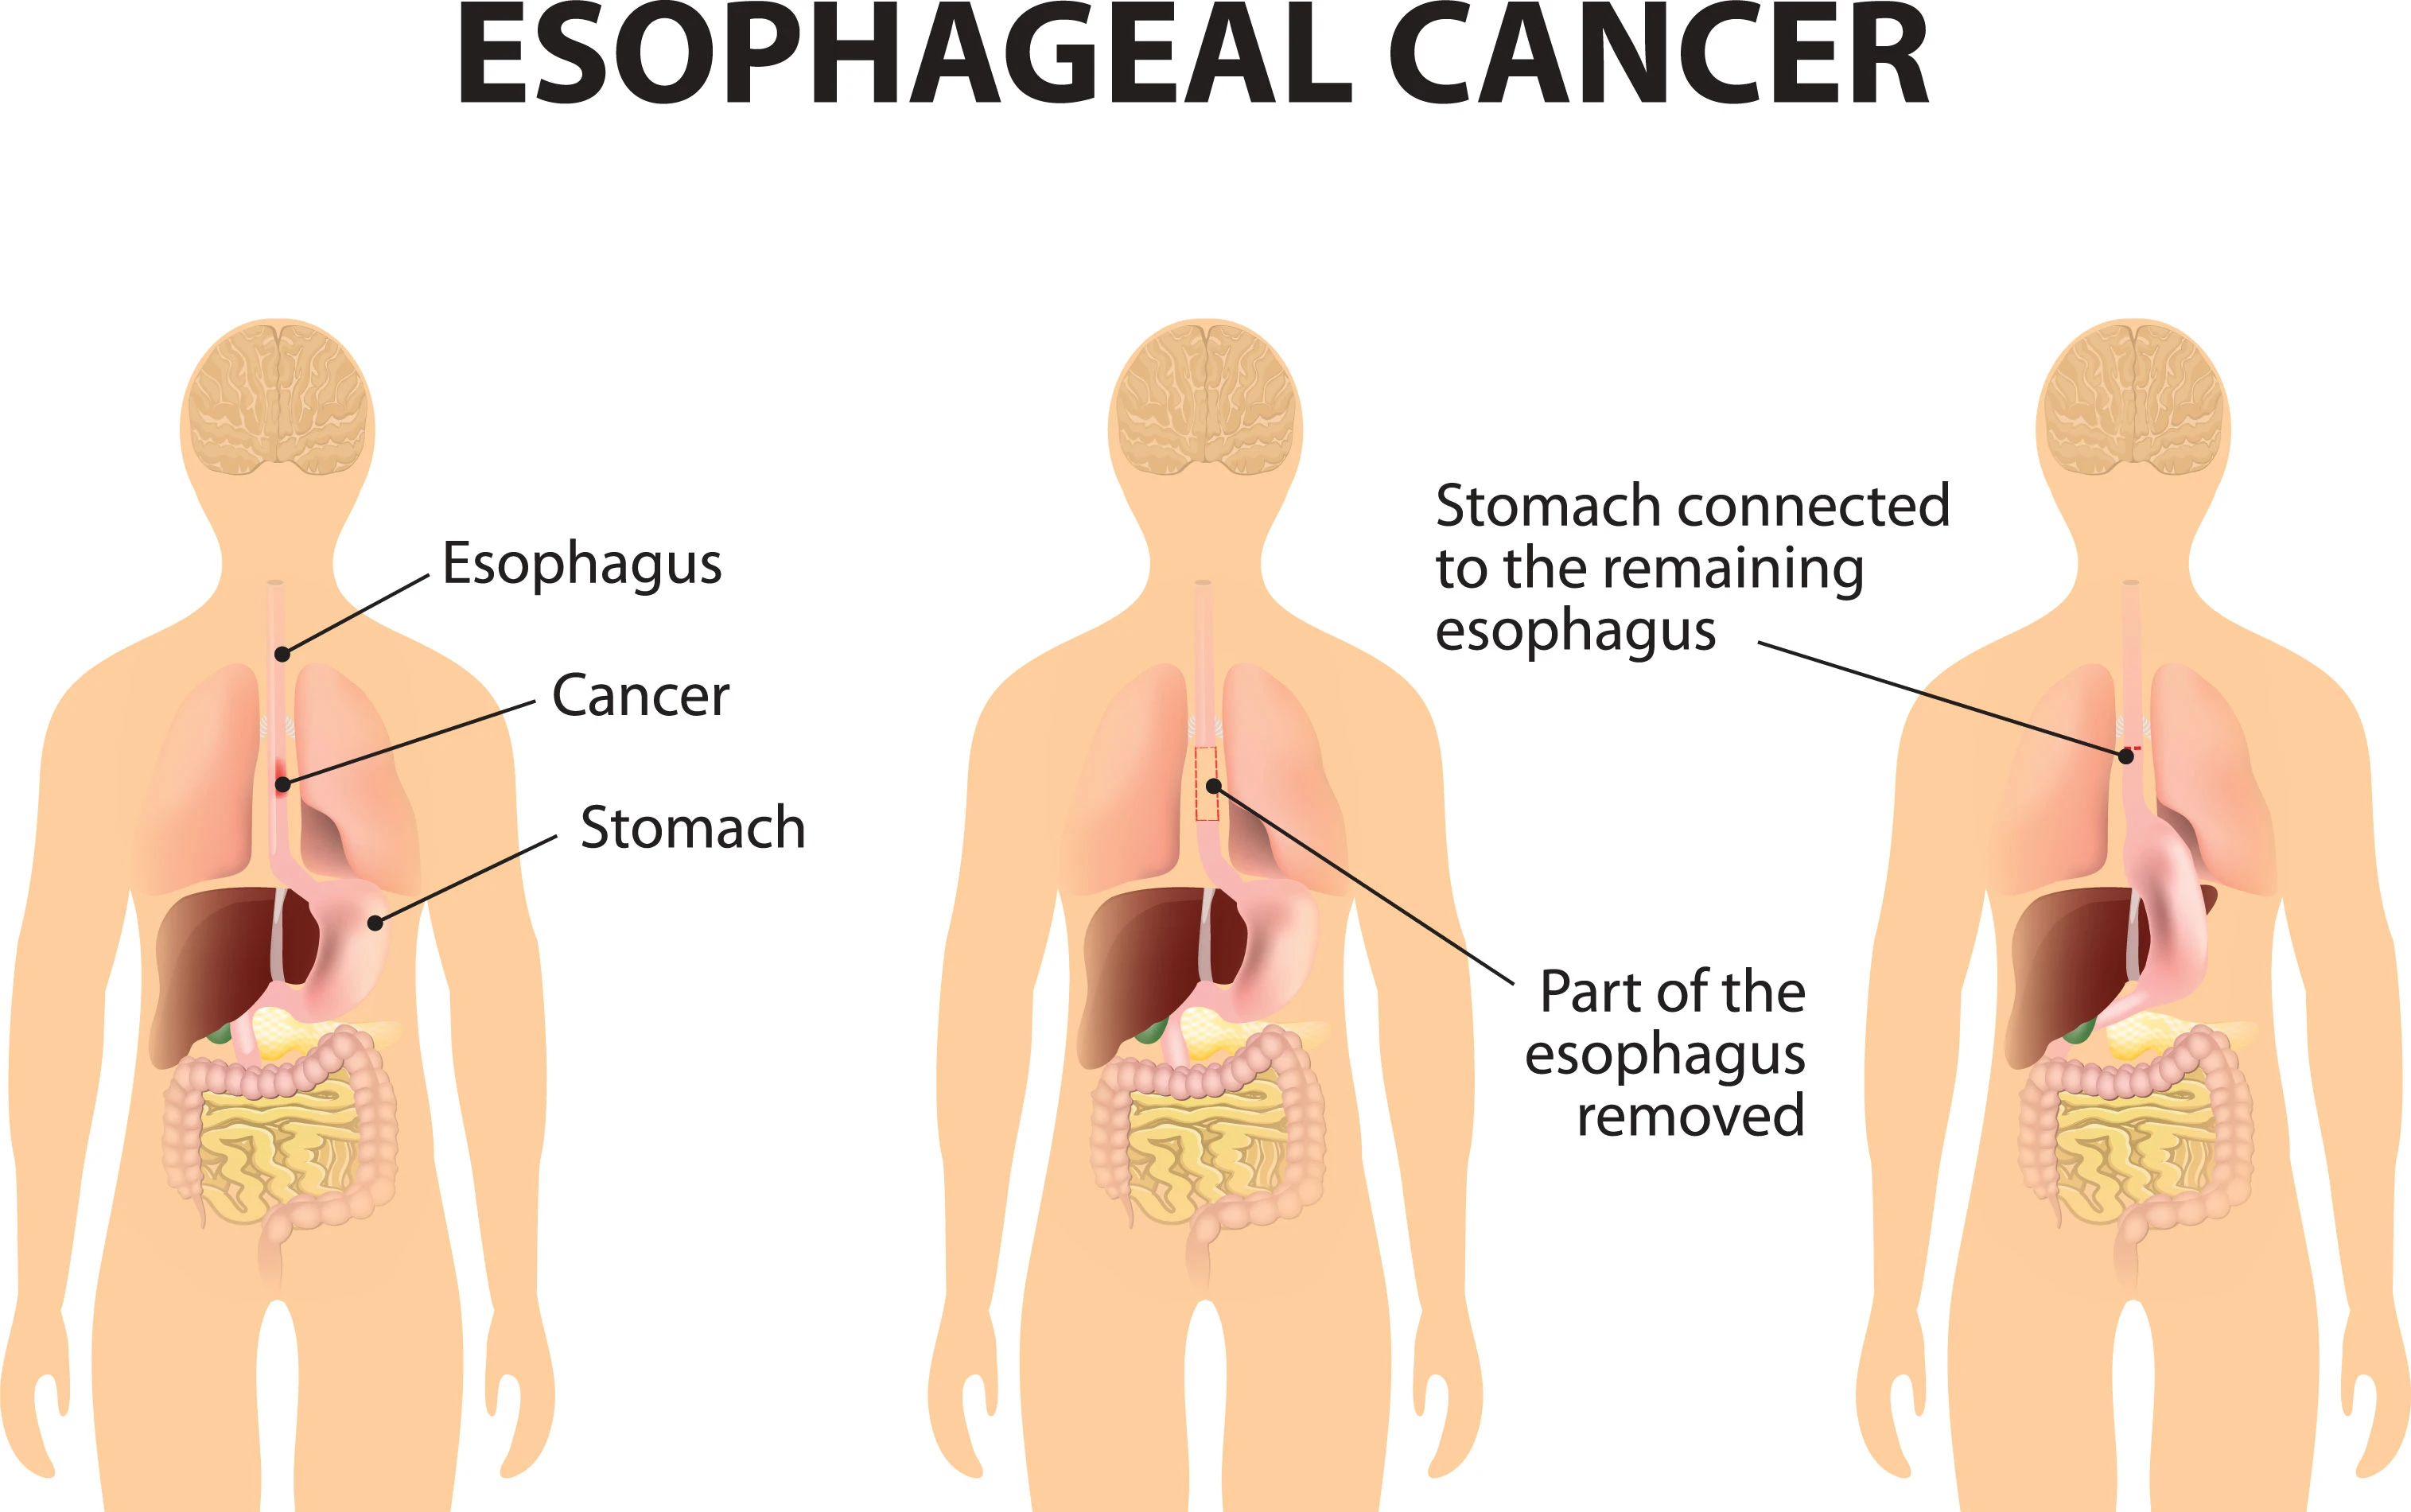 diagram of espohageal cancer surgey showing part of esophagus removed and stomach connecting to the remaining esophagus